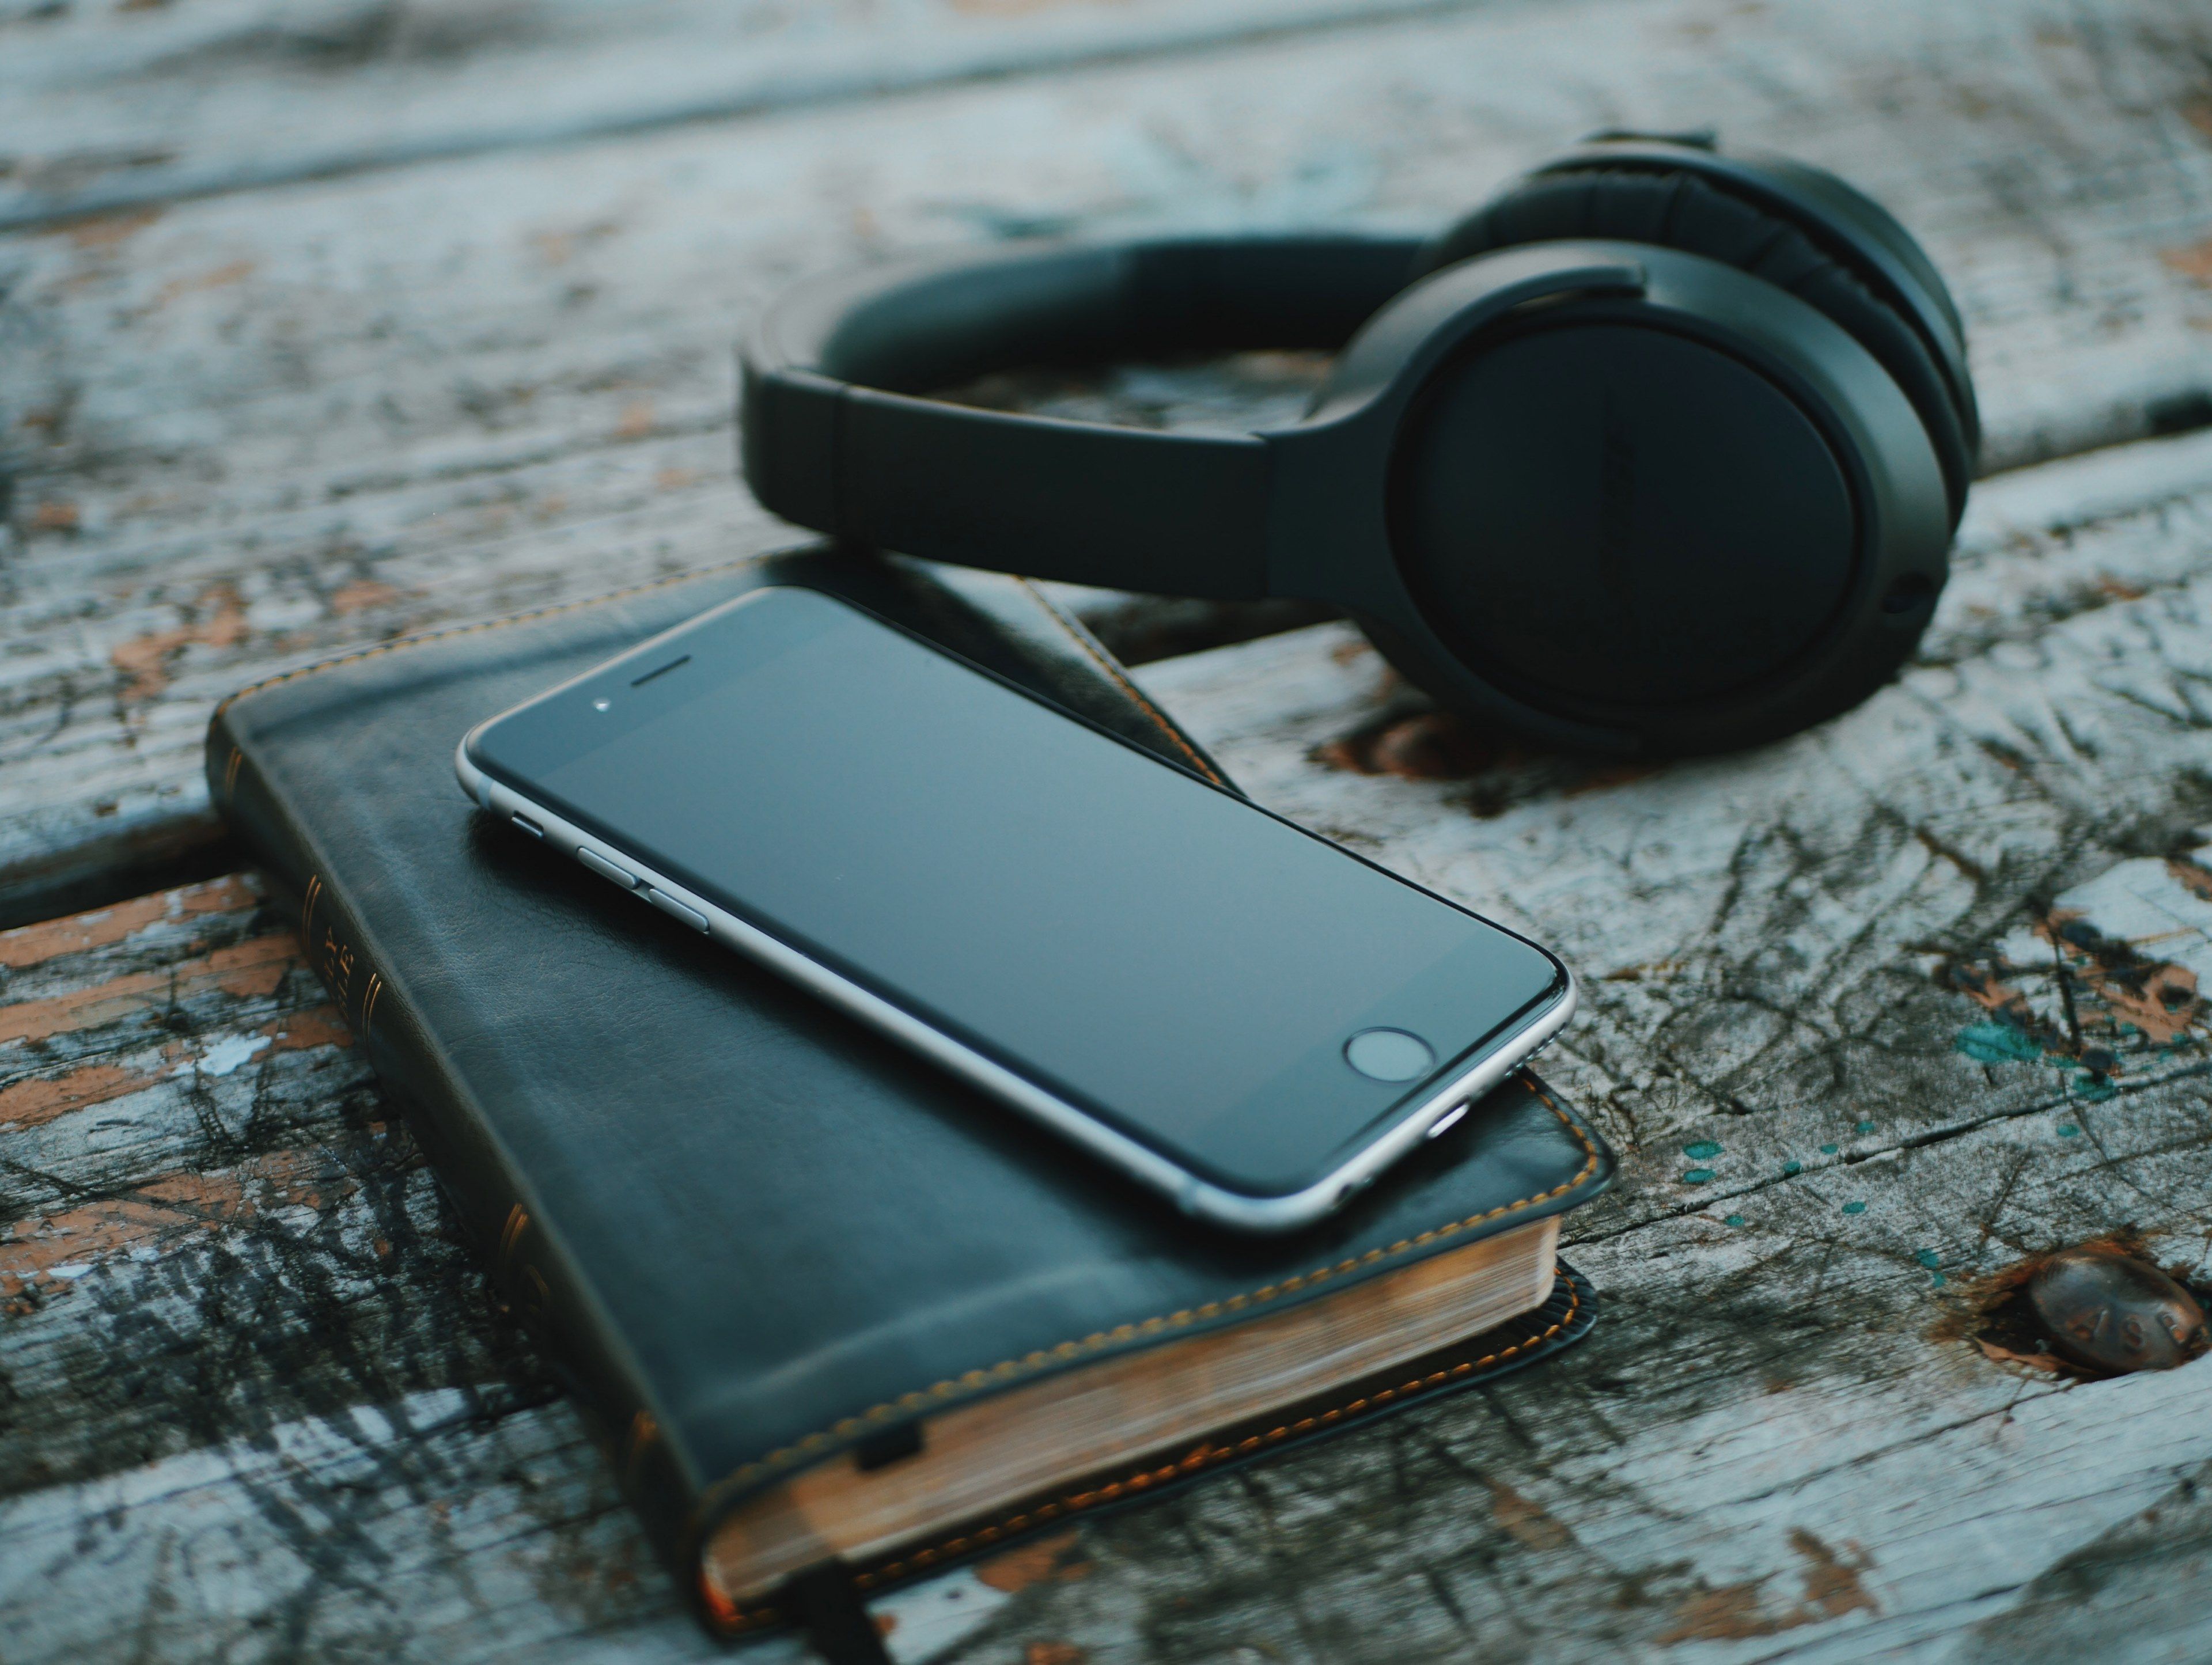 iphone headphone book and wood HD 4k wallpaper and background